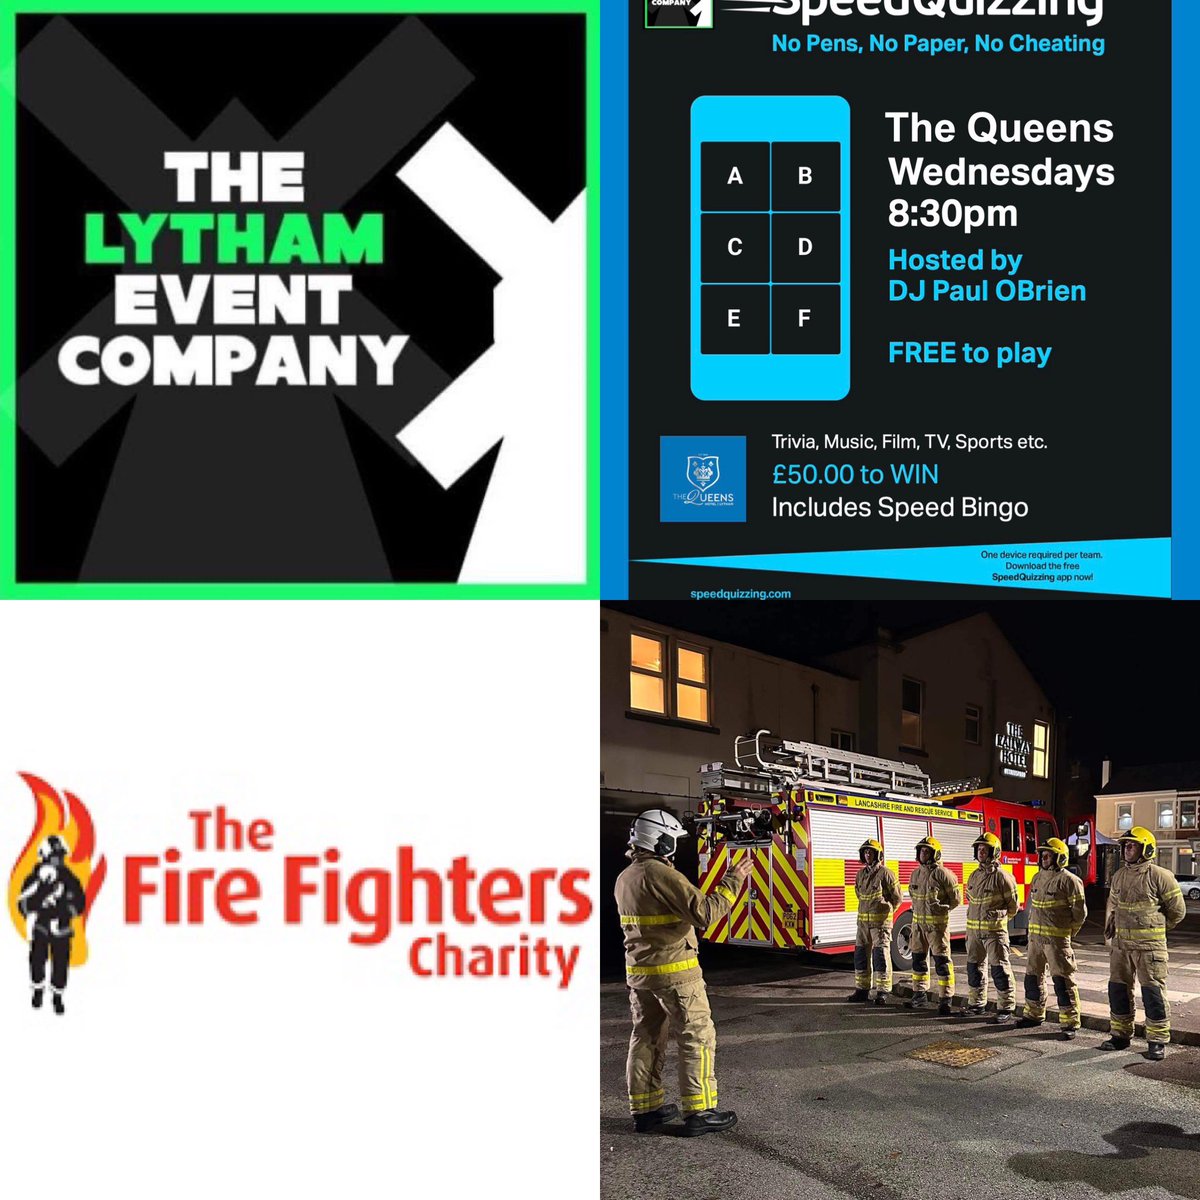 👏An amazing £185 banked from April for @firefighters999  from Wednesdays quiz donations at @SpeedQuizzing @queens_lytham  with @djpaulobrien 

@LancashireFRS @LythamFire 

Thankyou so much!  ❤️

#Charity #Lytham #FireAndRescue #Queens